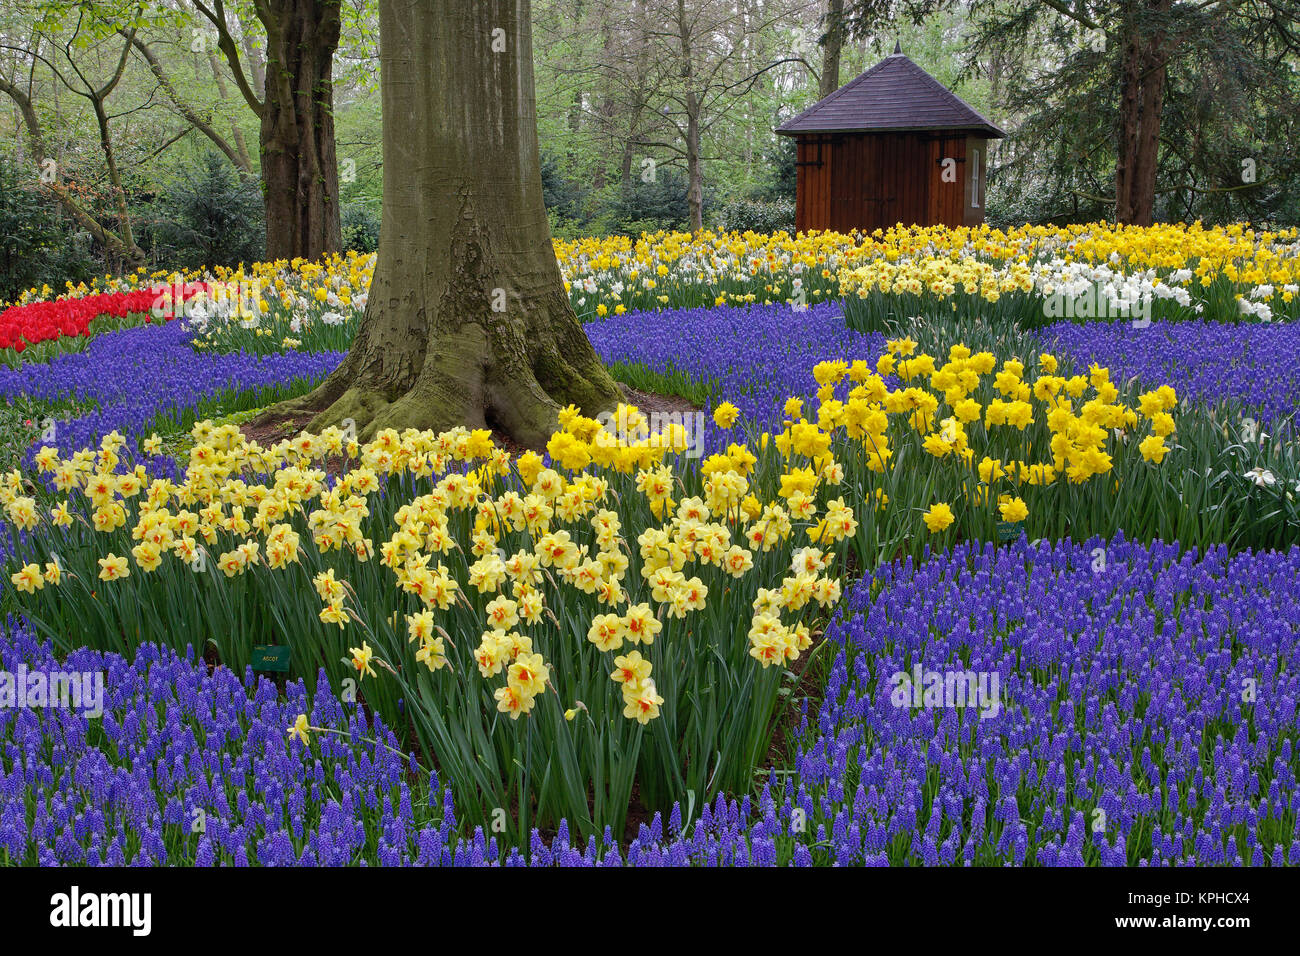 Daffodils Grape Hyacinth And Tulip Garden Garden Of Rhododendron Stock Photo Alamy